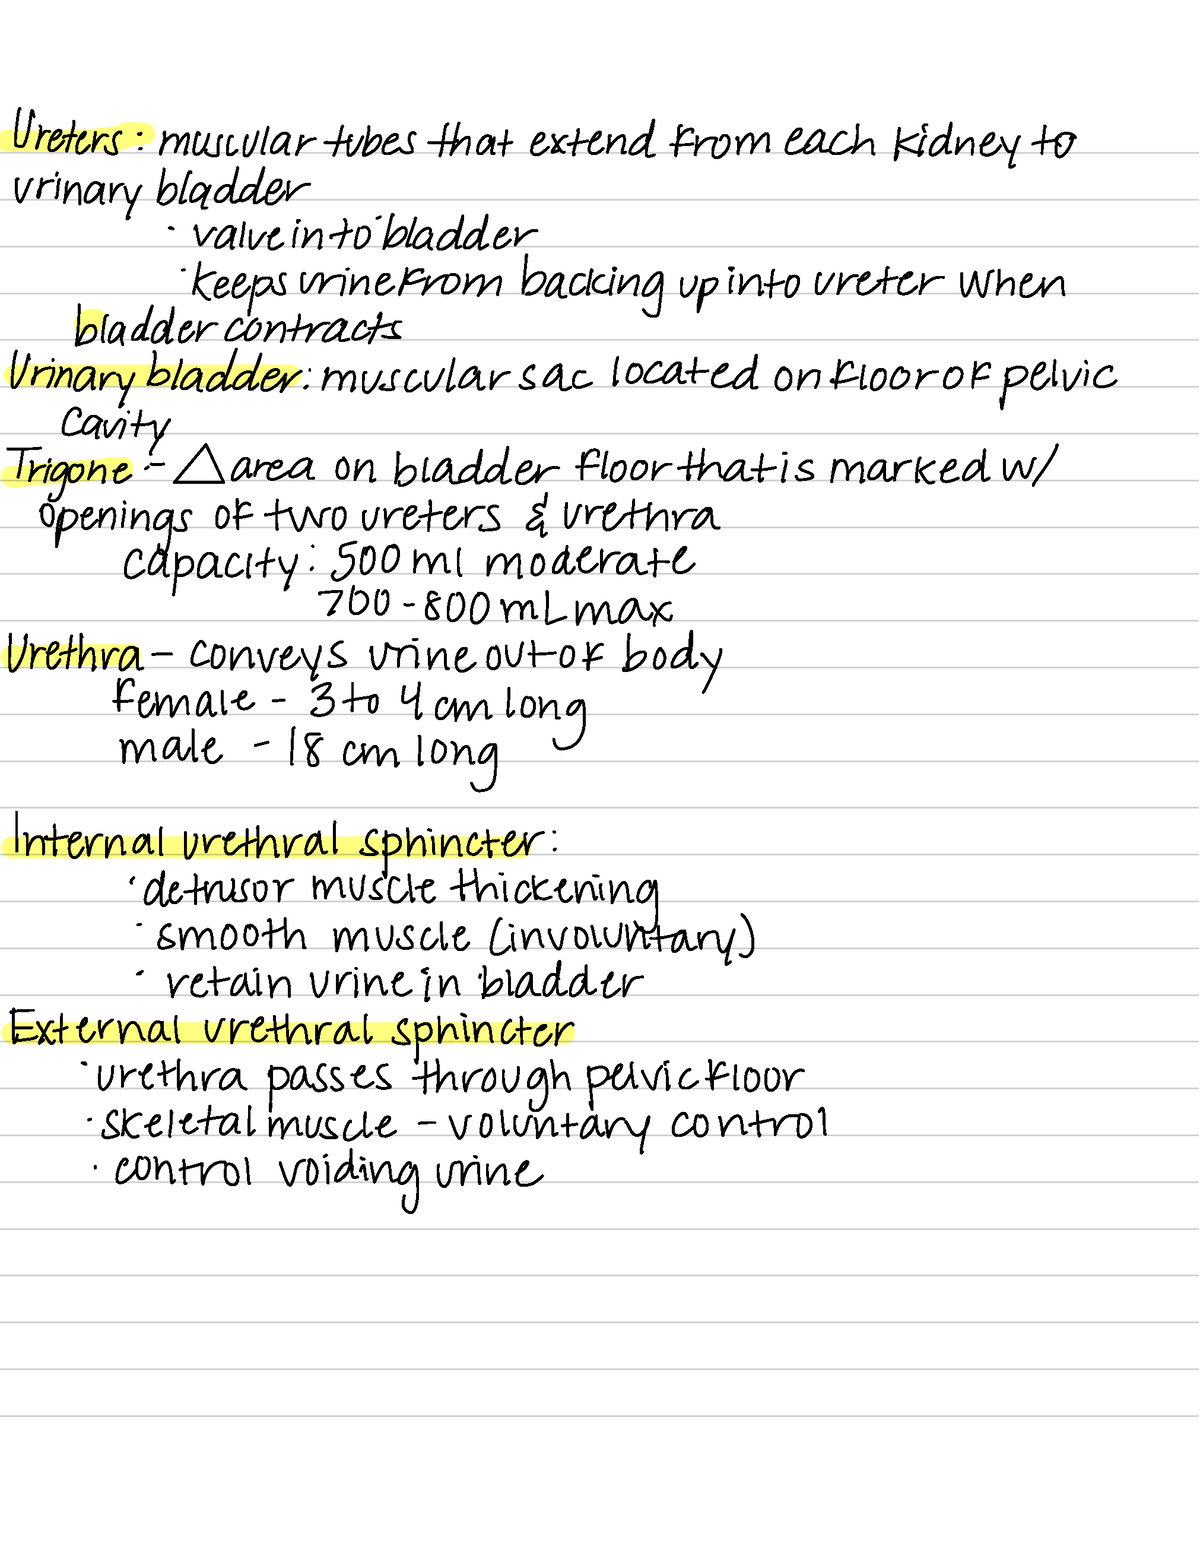 Introduction to Urinary System - Ureters : muscular tubes that extend ...